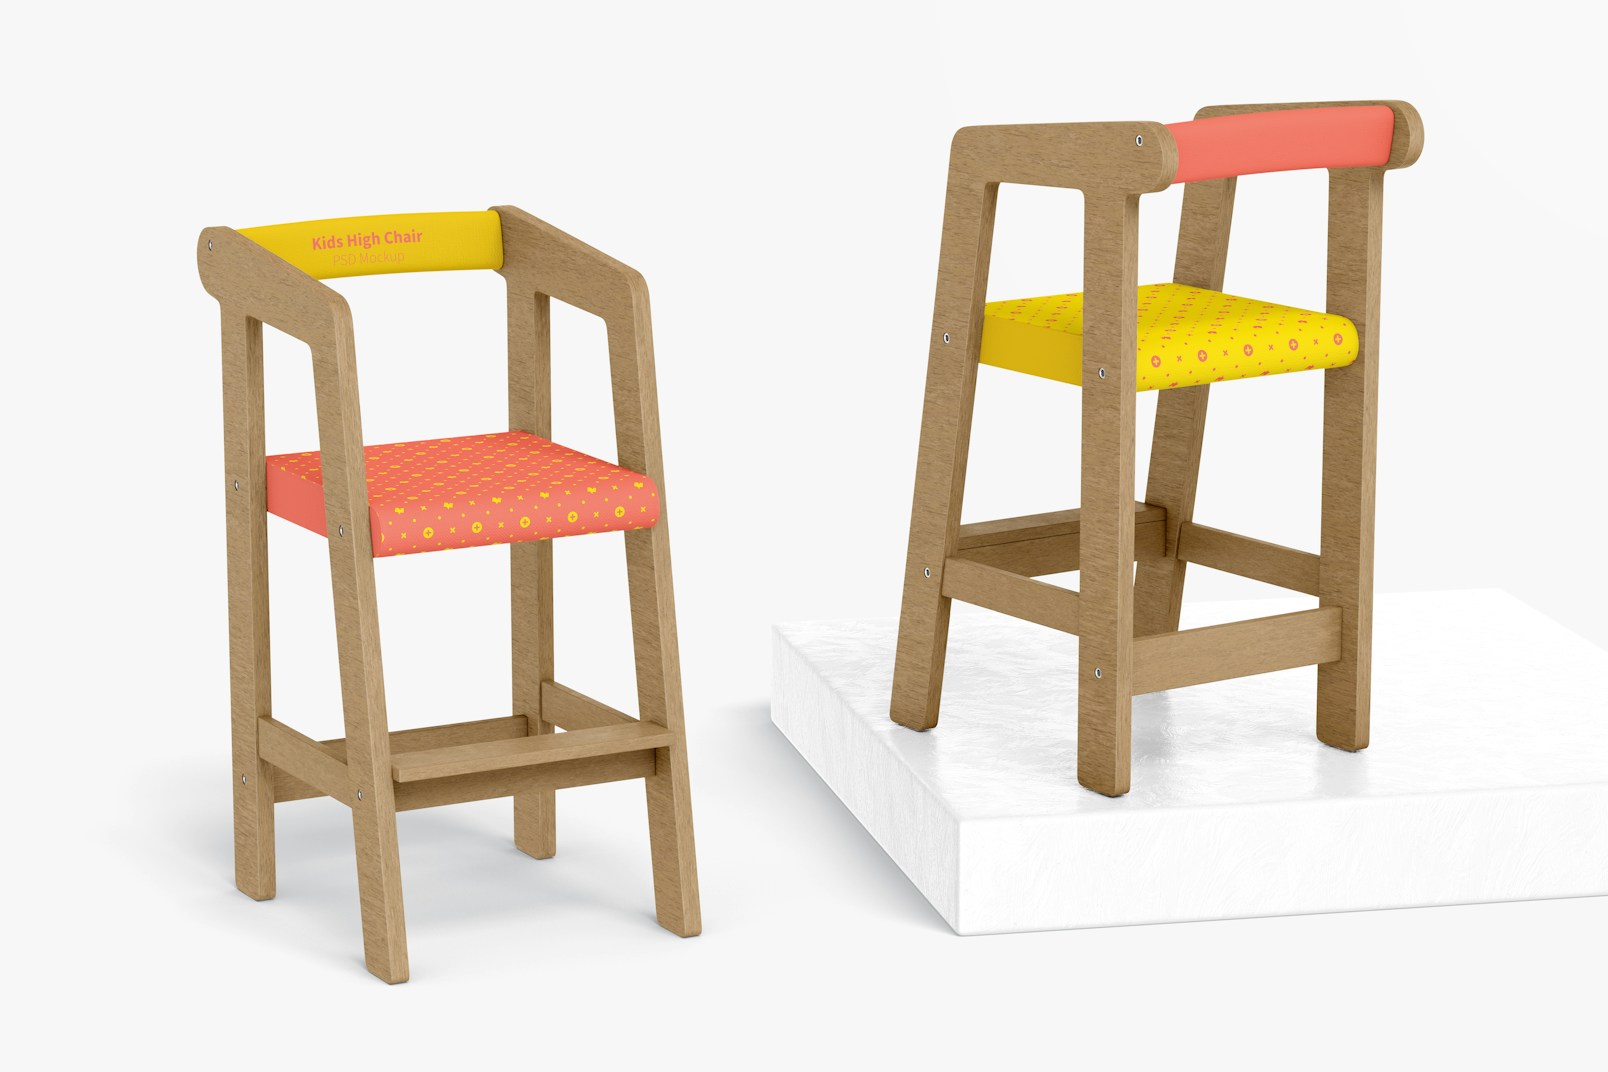 Kids High Chairs Mockup, Front and Back View